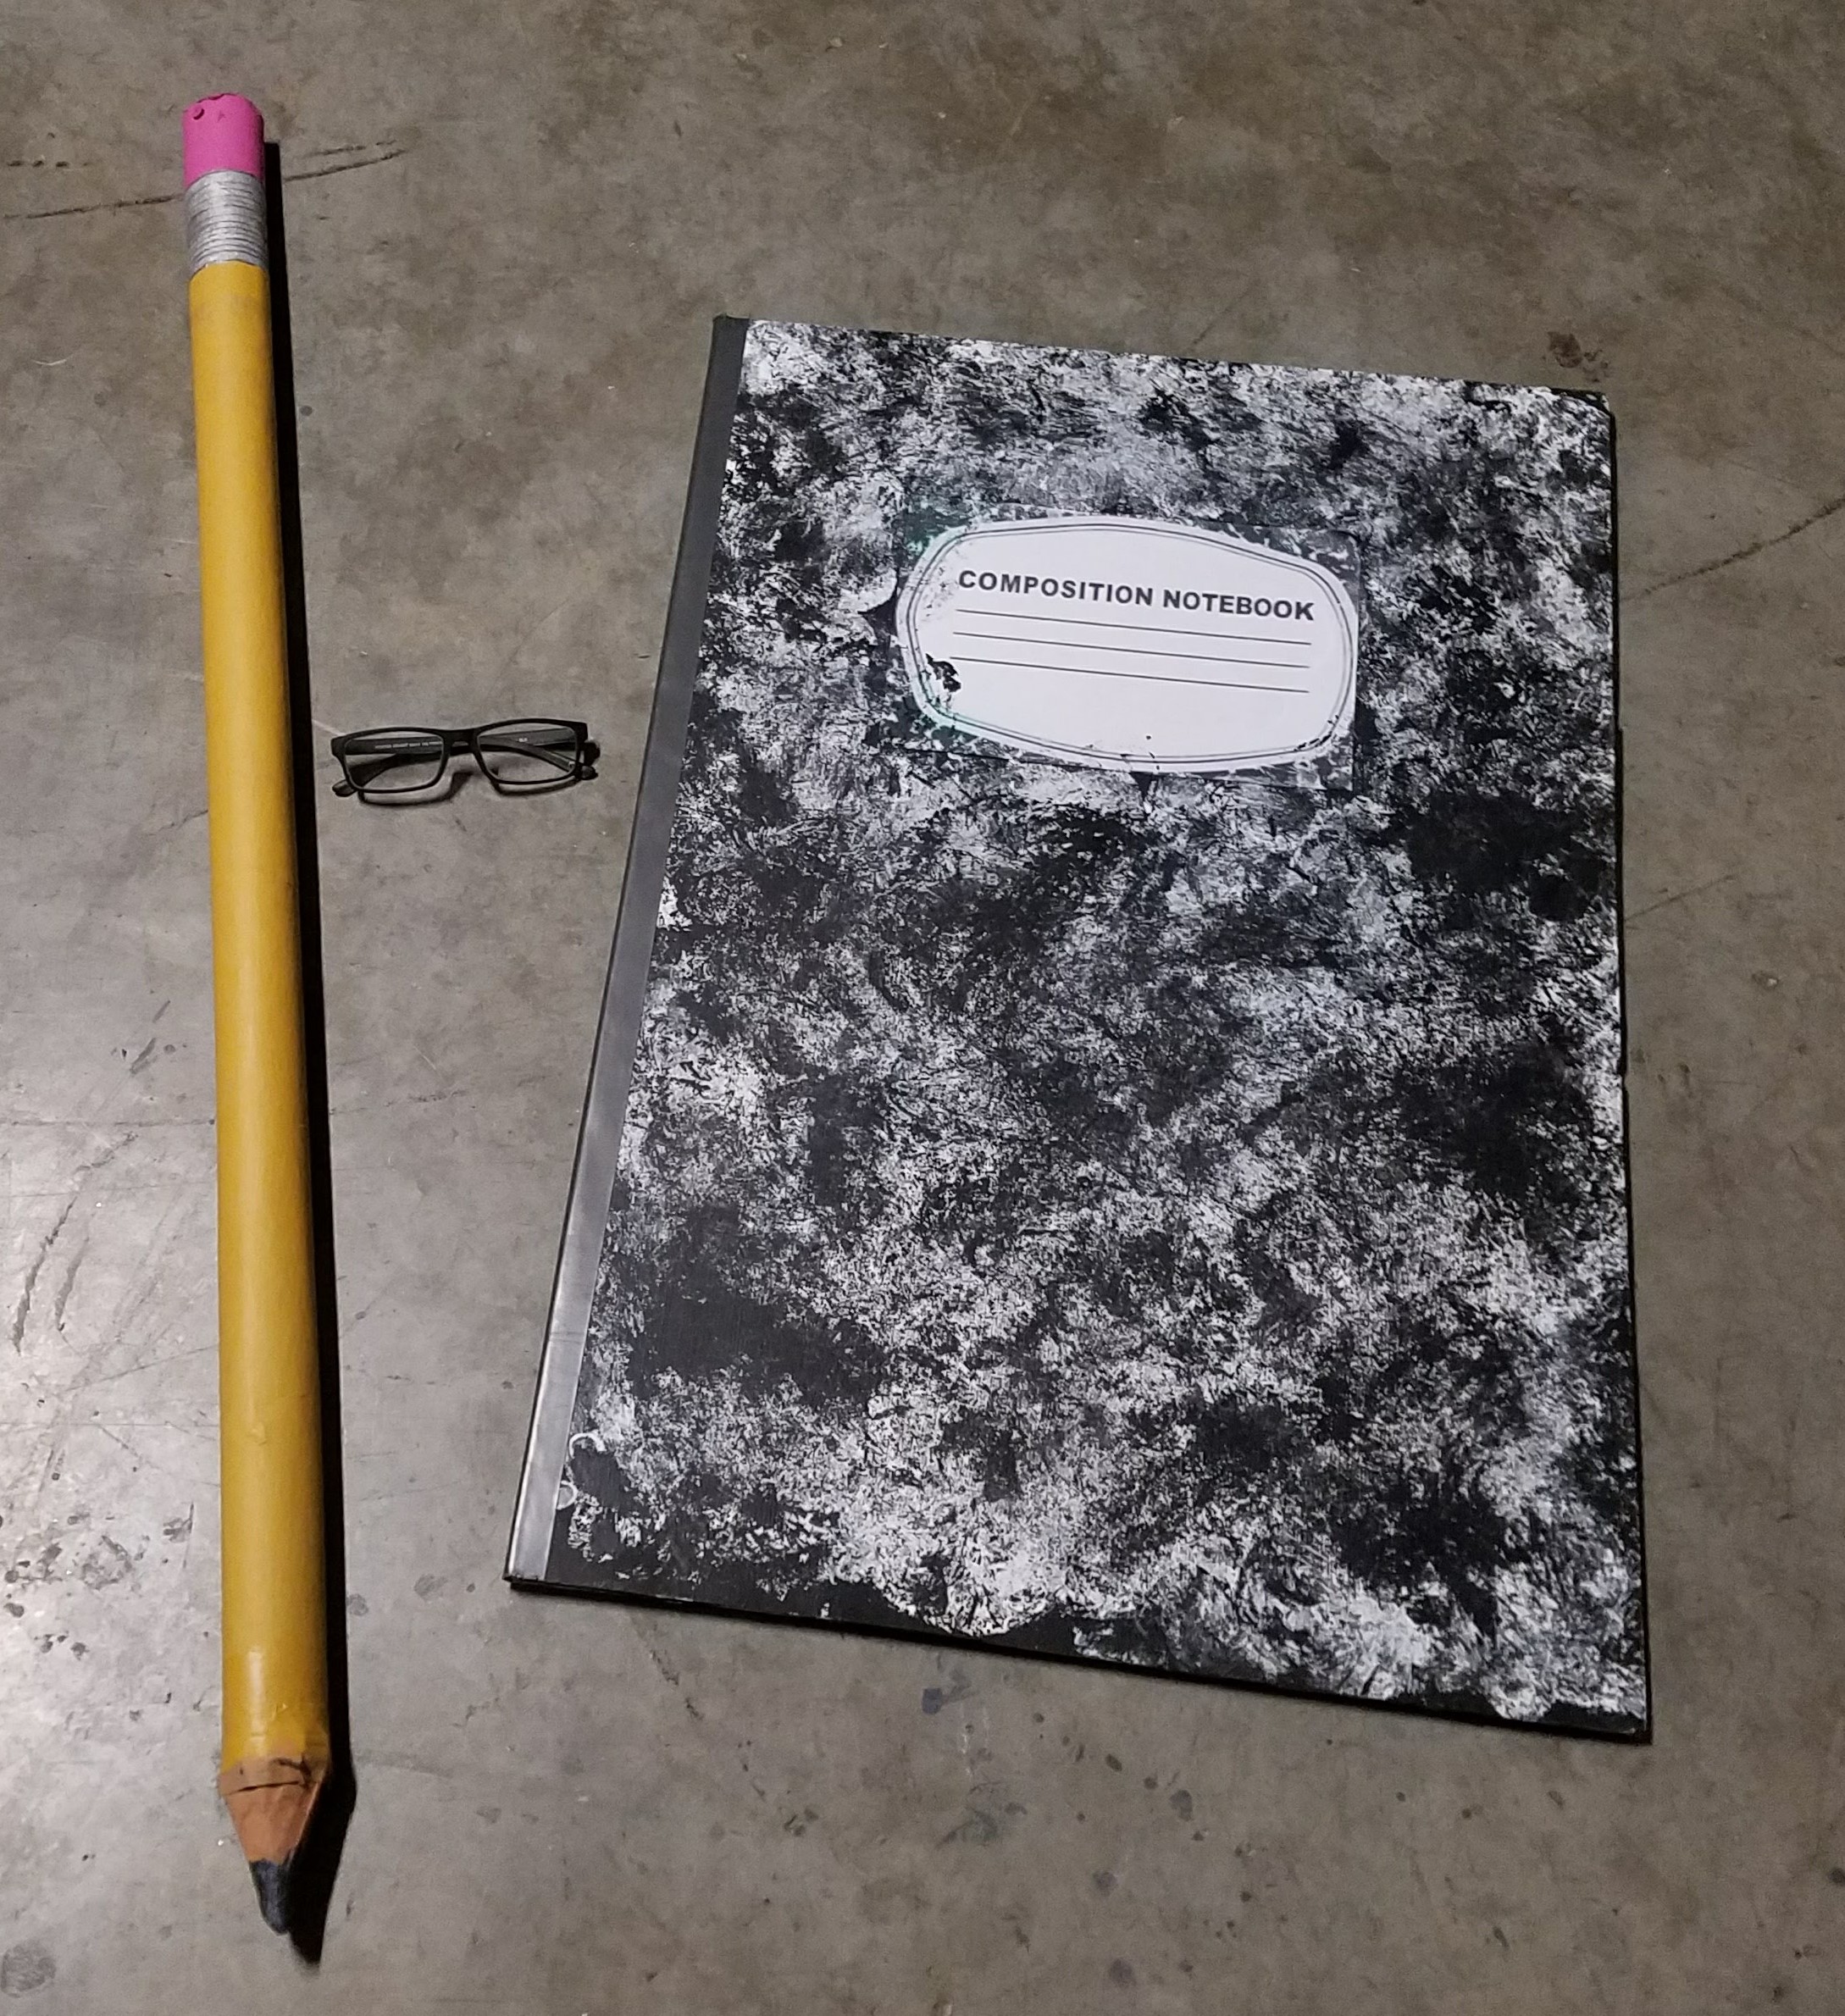 Oversized Props Tutorial: Creating an Oversized Notepad and Pencil